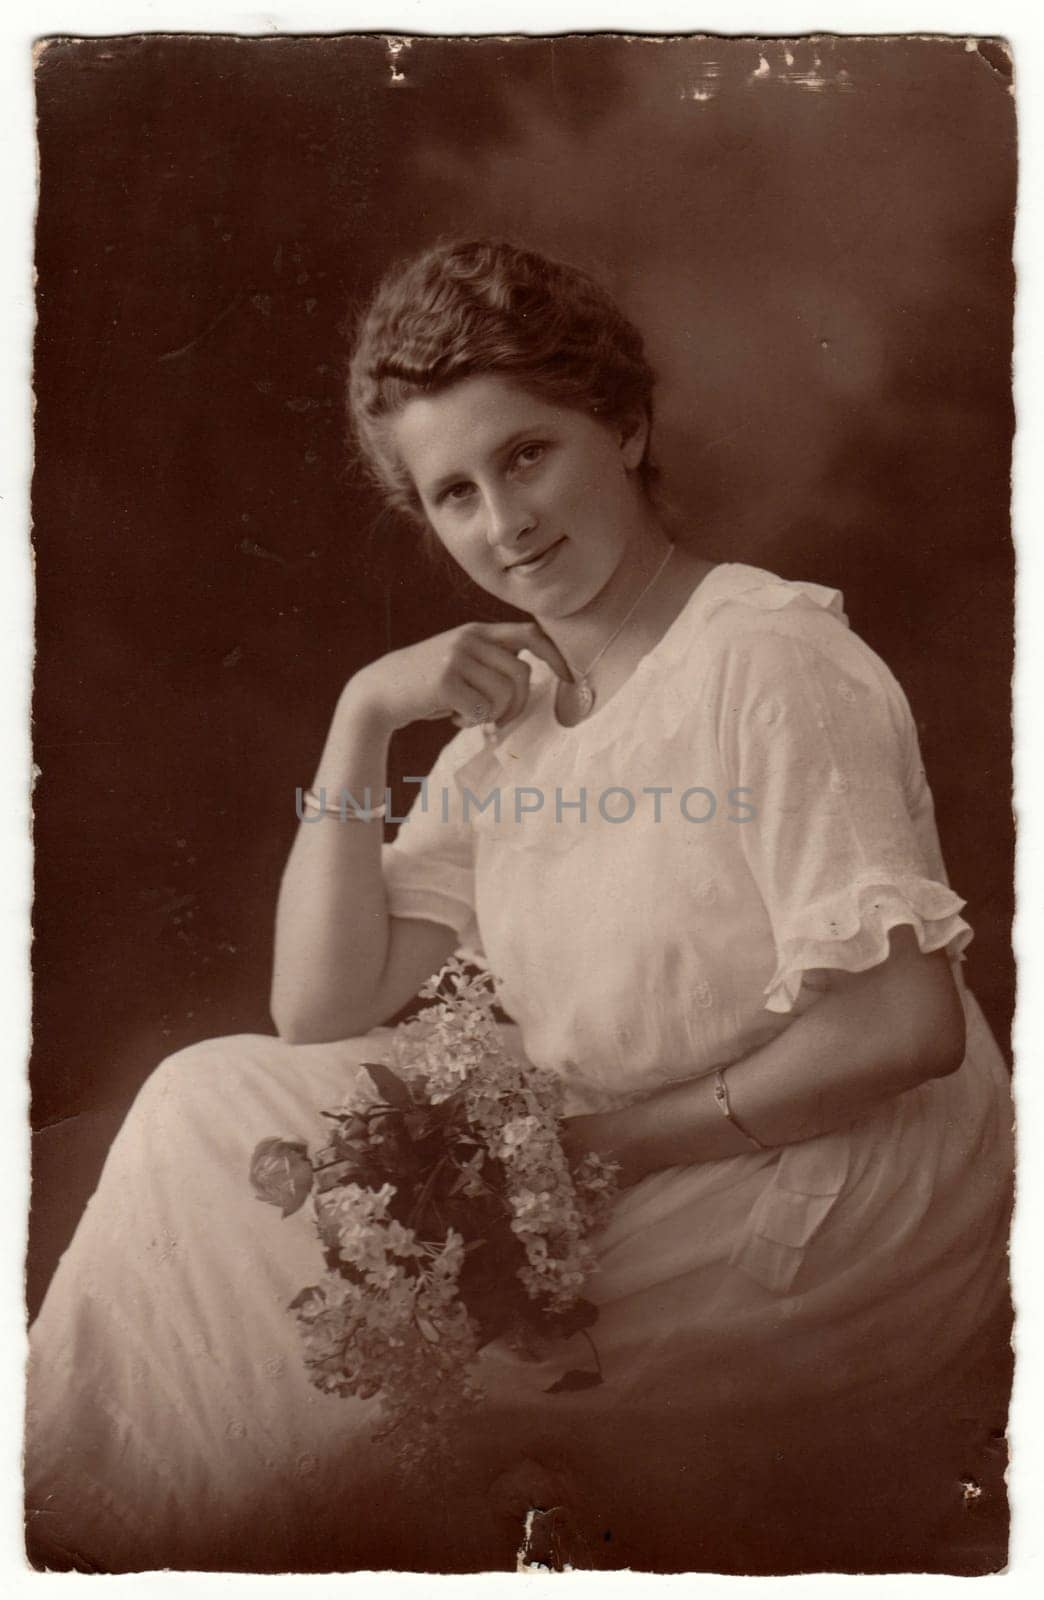 GERMANY - CIRCA 1920s: Vintage photo shows woman with short hair. Woman wears white dress and holds bouquet - bunch of flowers. Retro black and white studio photography with sepia effect. Circa 1920s